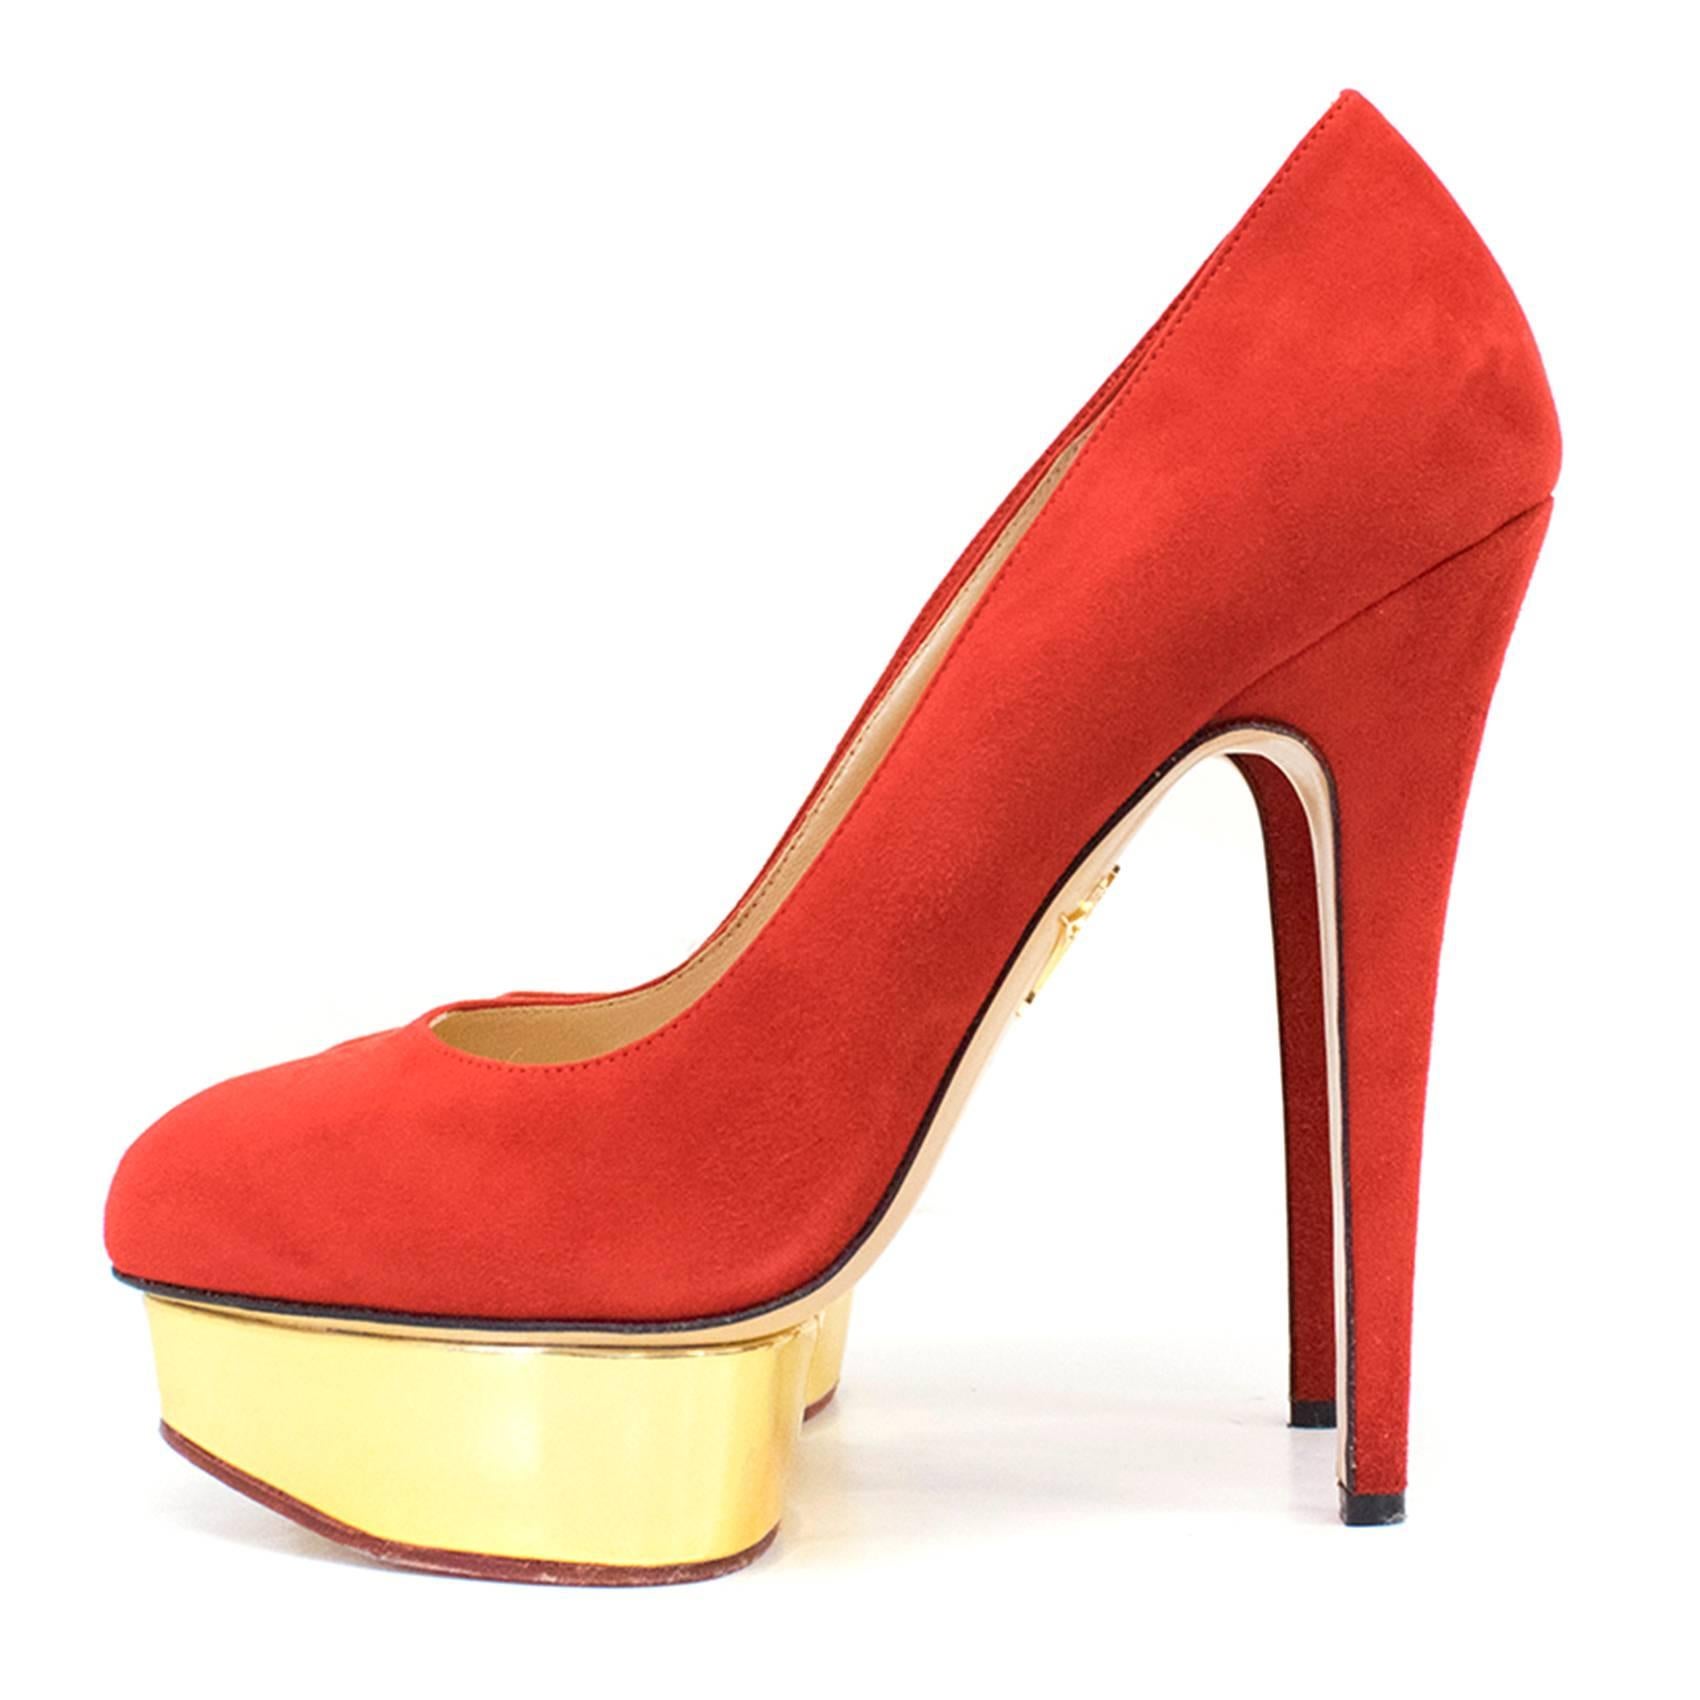 Women's Charlotte Olympia Red Suede Platform Heels For Sale